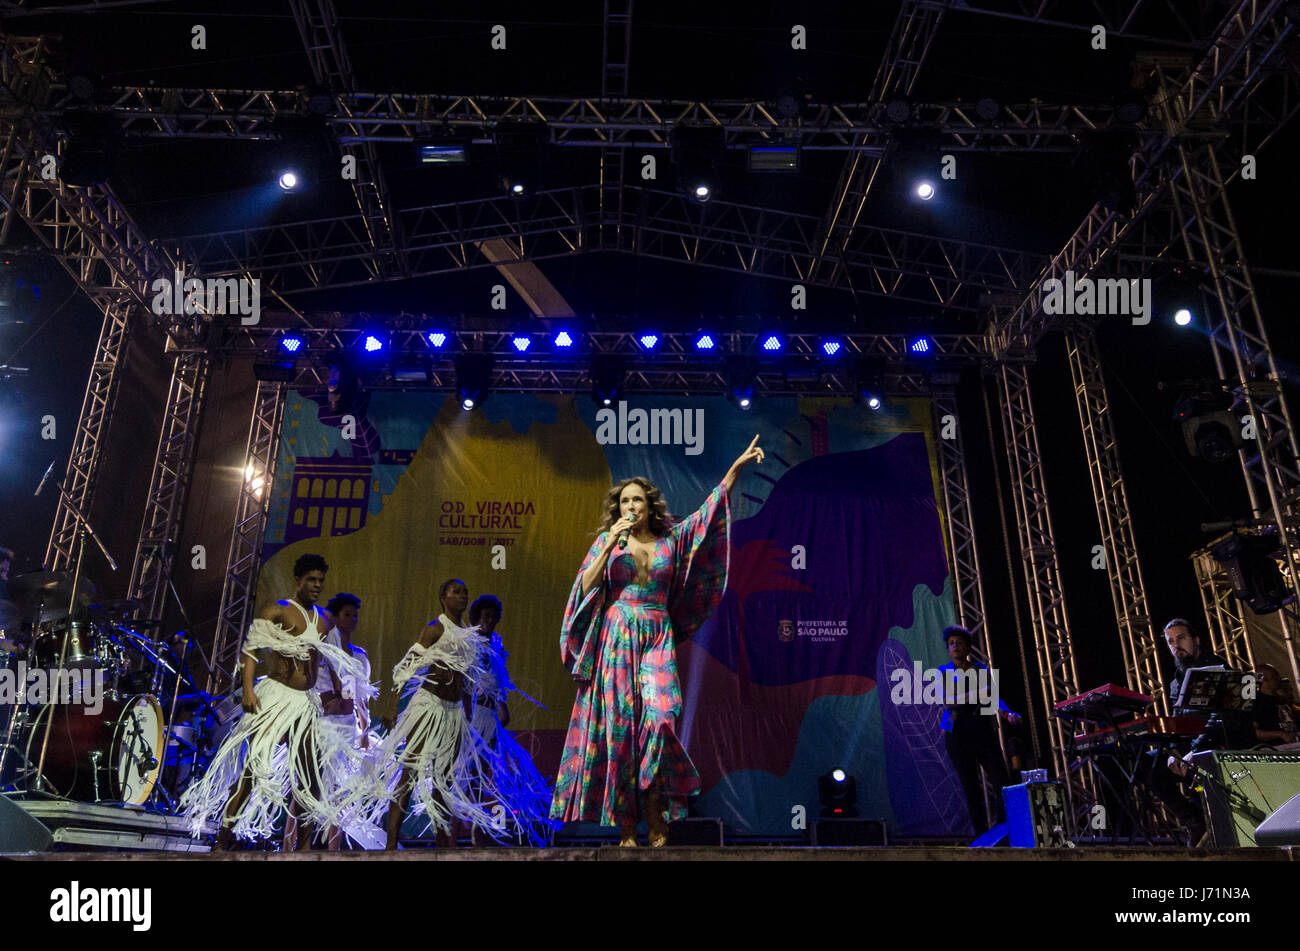 The singer Daniela Mercury performs at the Sambódromo do Anhembi, as part of the schedule of Virada Cultural, in São Paulo, this Saturday, 20.  (PHOTO: BETE MARQUES/BRAZIL PHOTO PRESS) Stock Photo